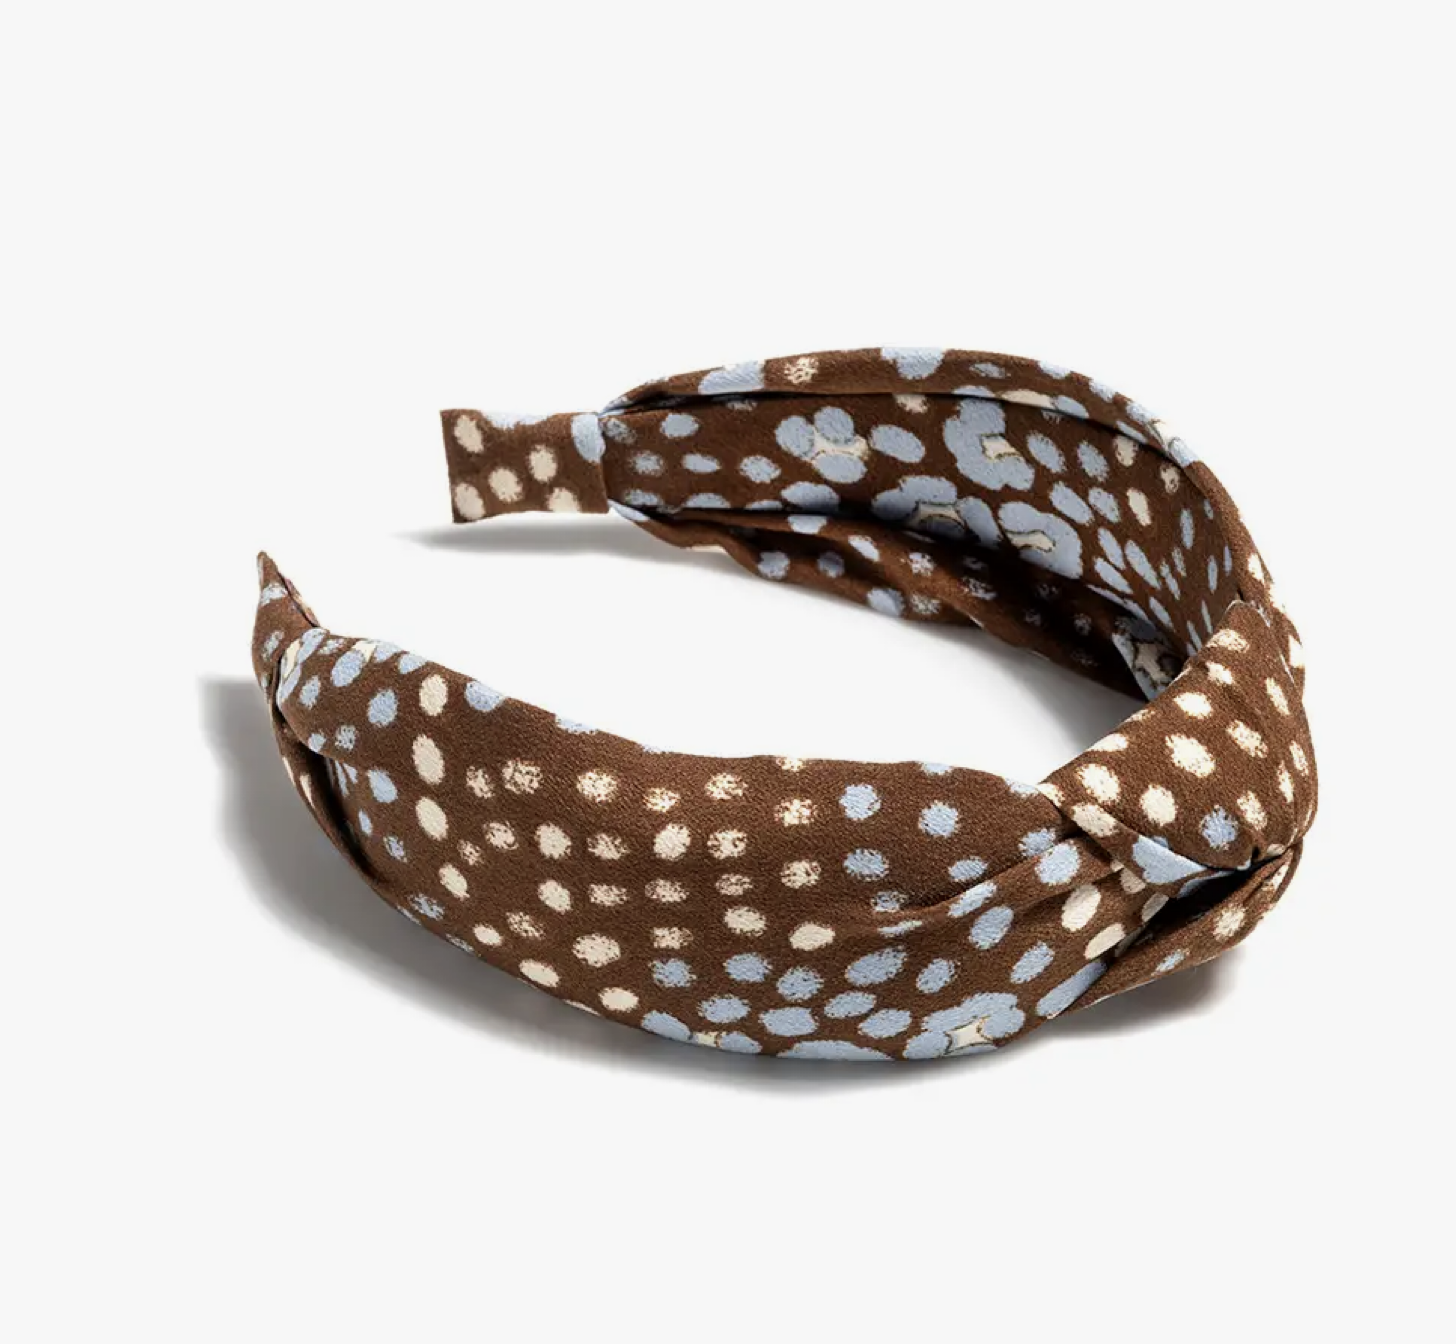 Knotted Headband- Patterned